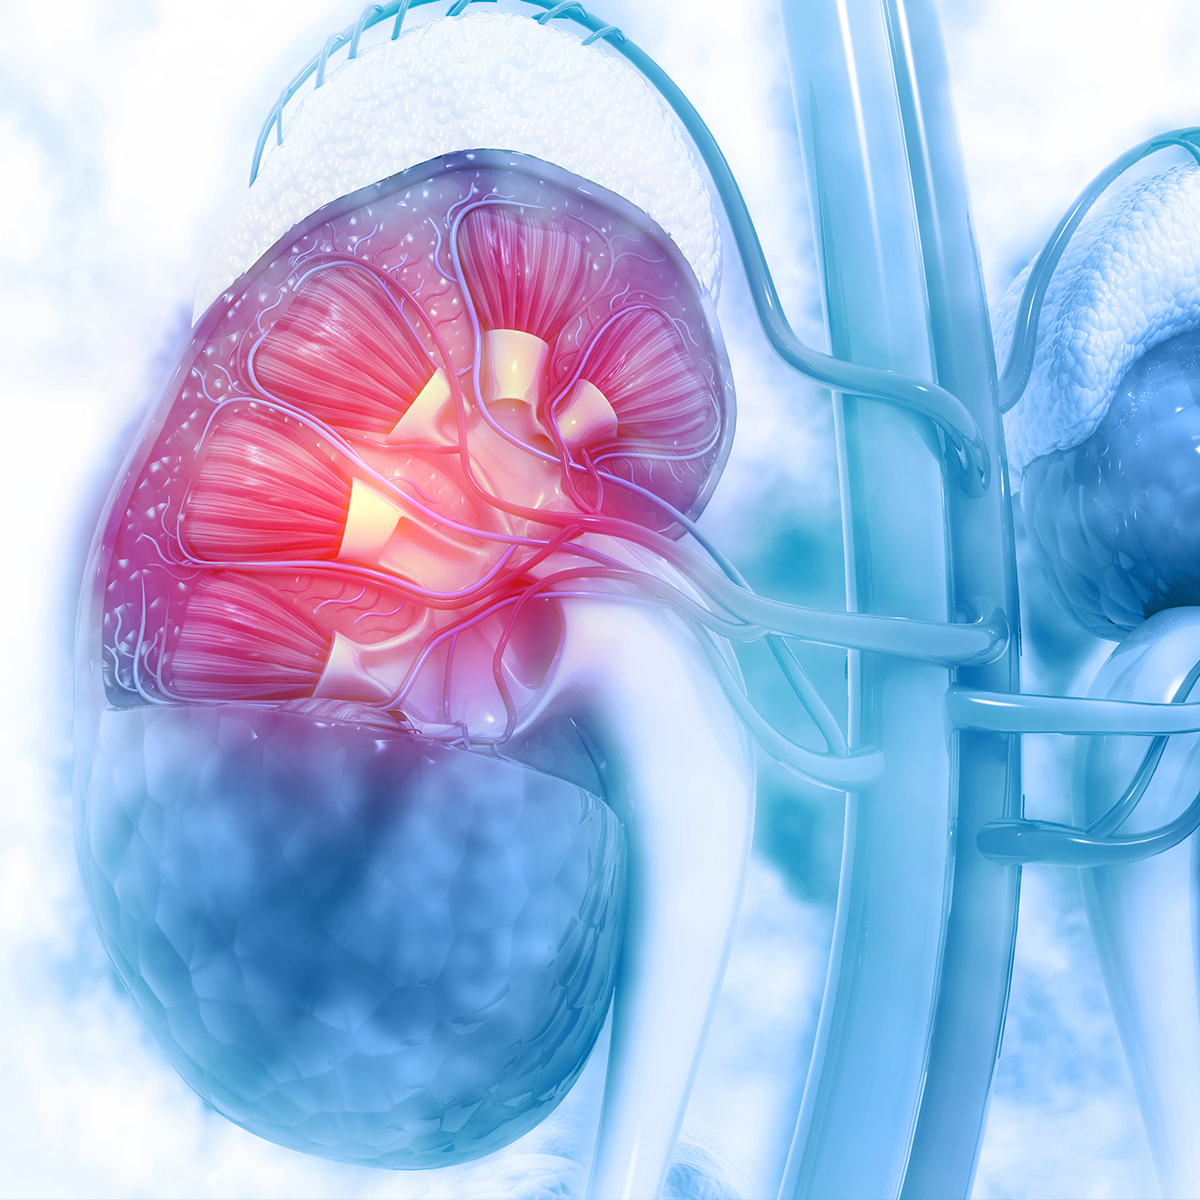 Frontline immunotherapy resulted in improved progression-free survival and overall survival compared with sunitinib in patients with advanced renal cell carcinoma; however, determining the benefit in those with favorable-risk disease must be examined further.